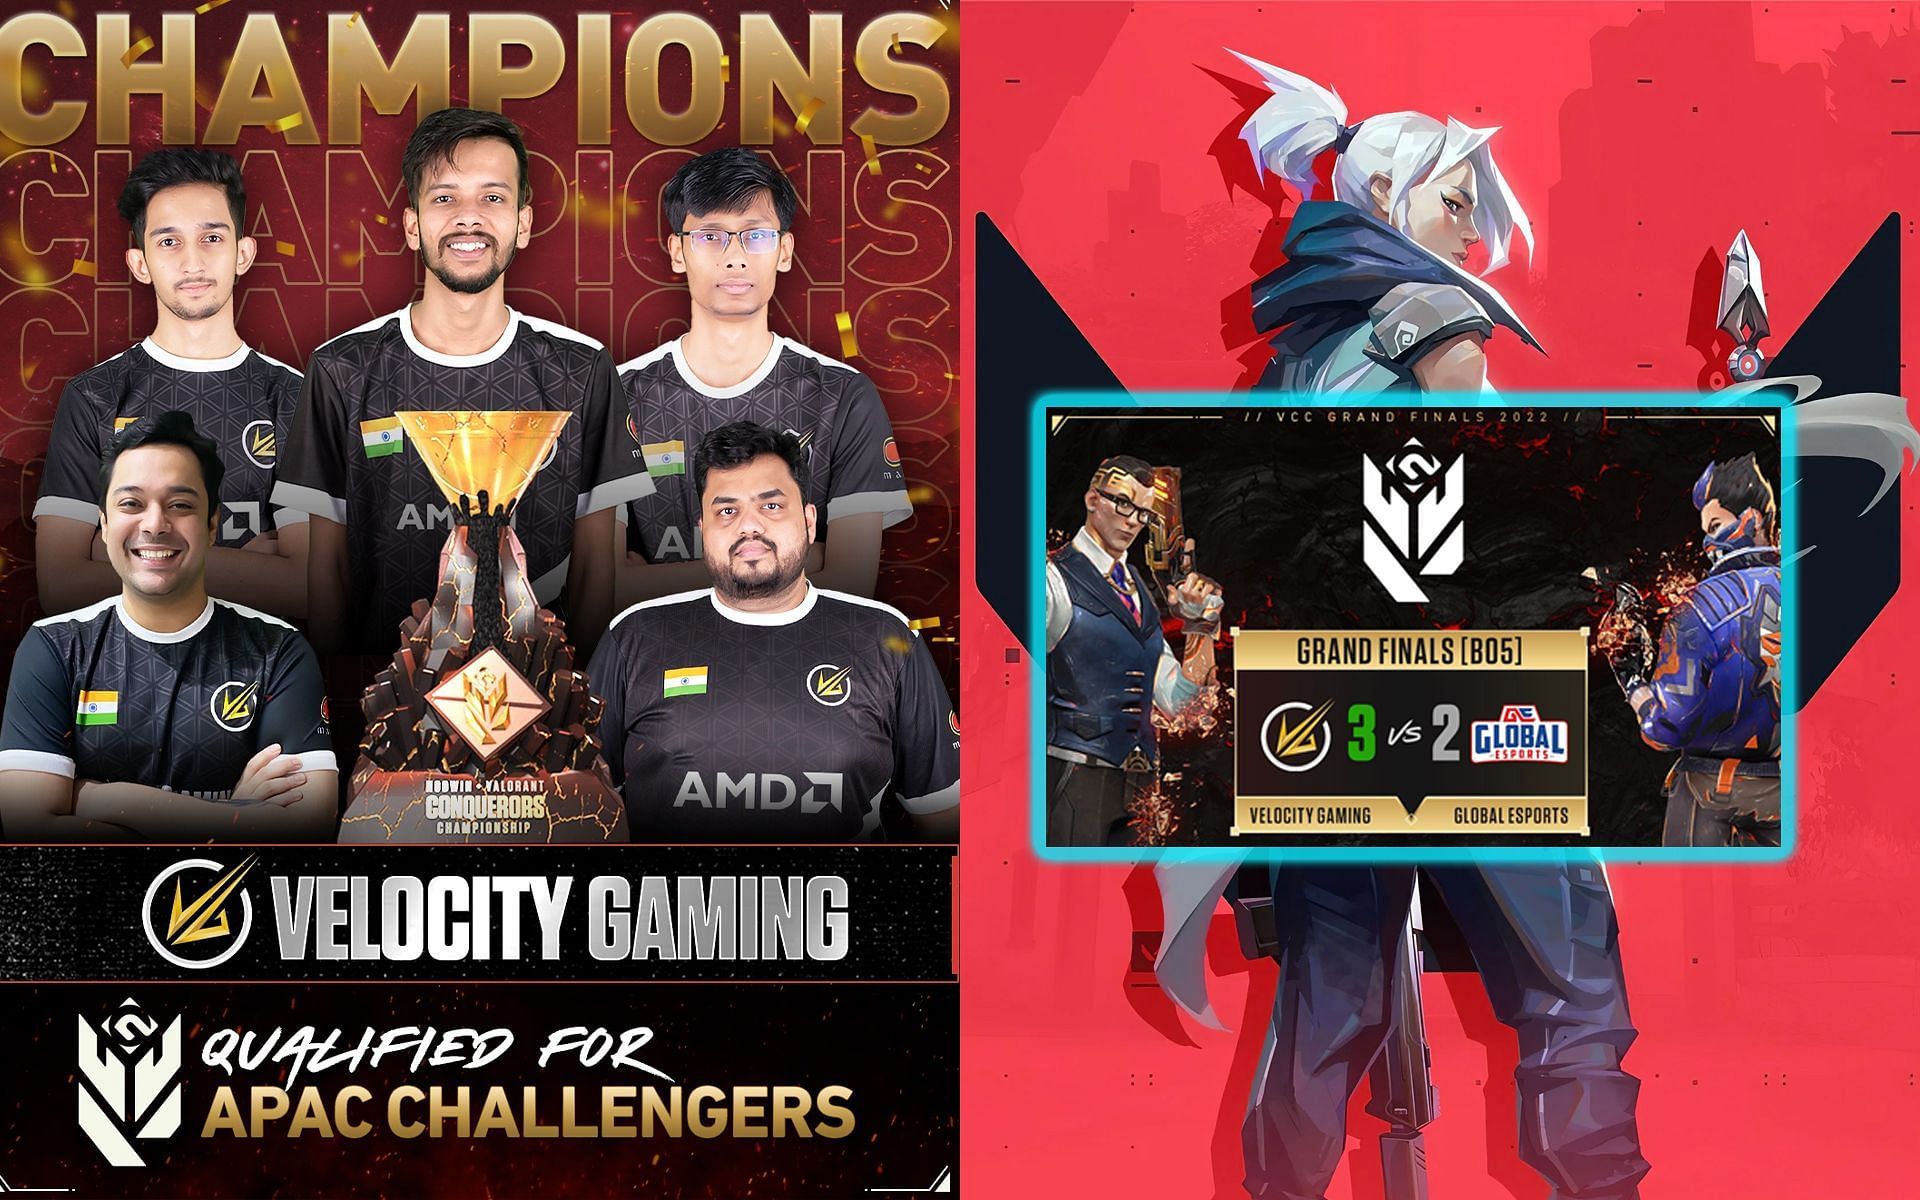 VELOCITY GAMING ™ on Instagram: We are the Fan Favourite Esports